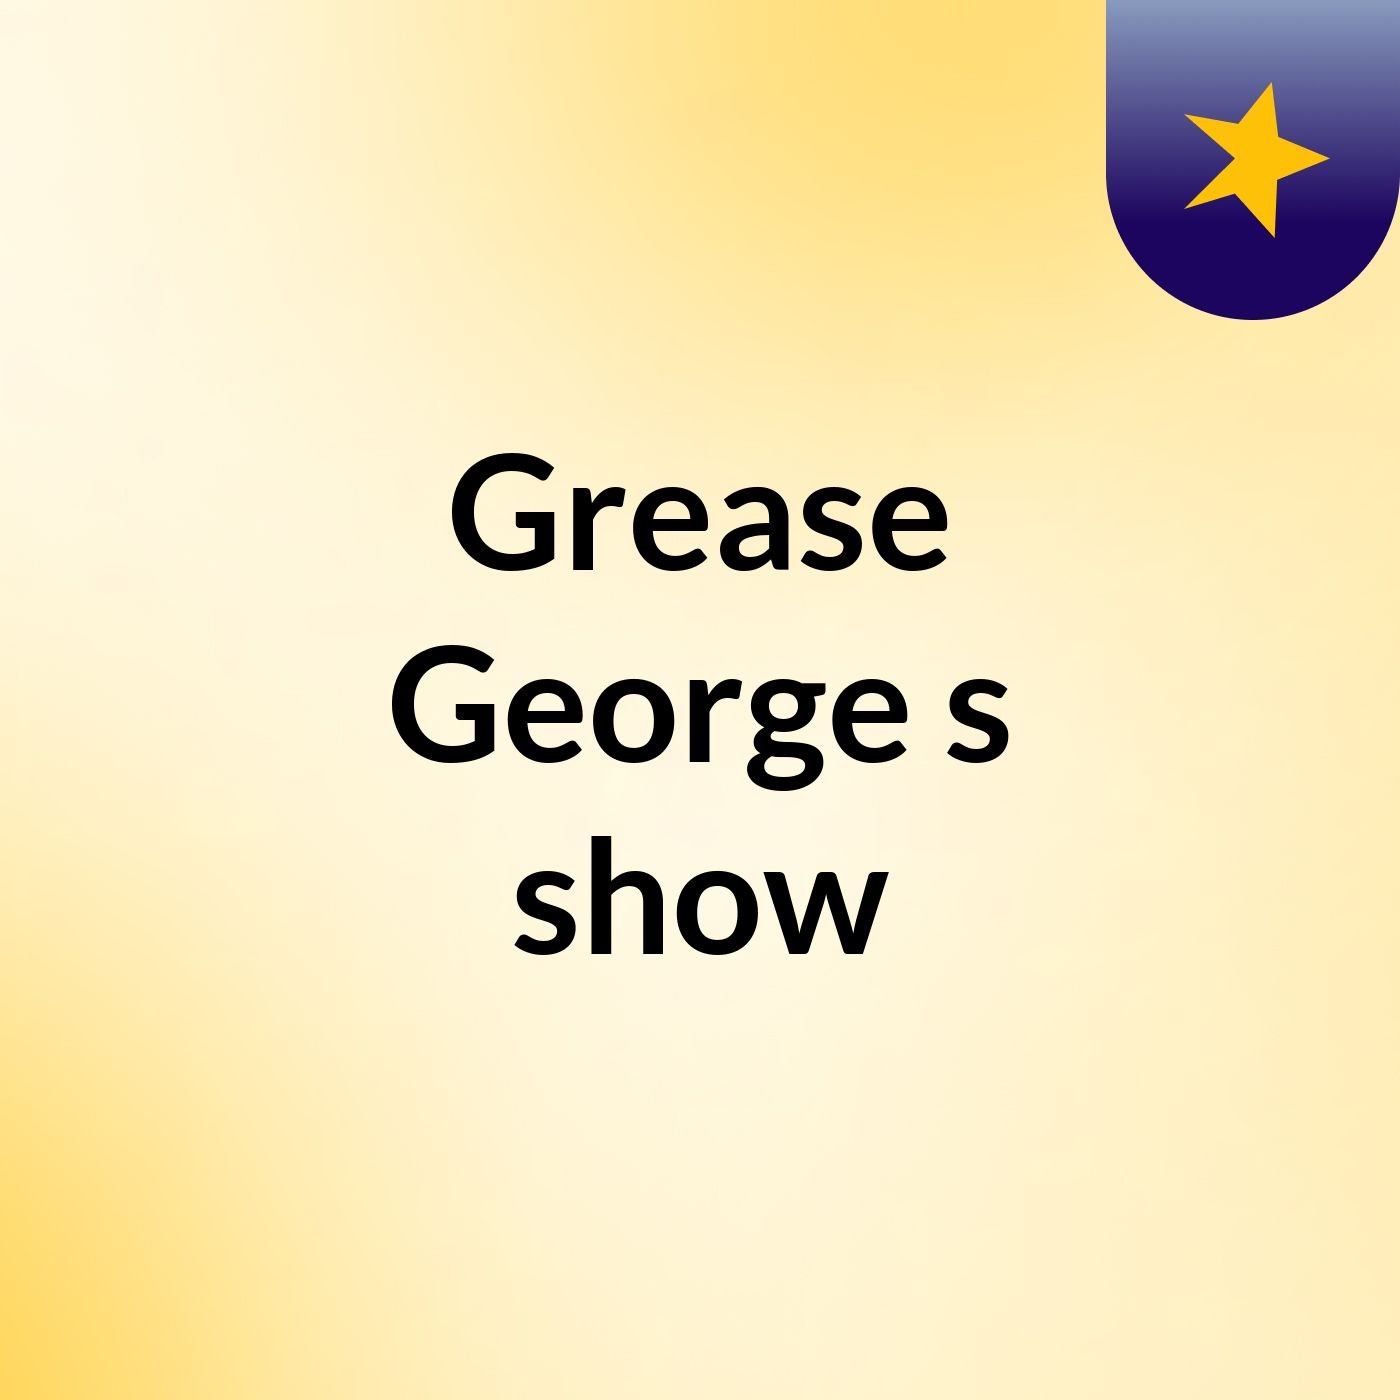 Grease George's show